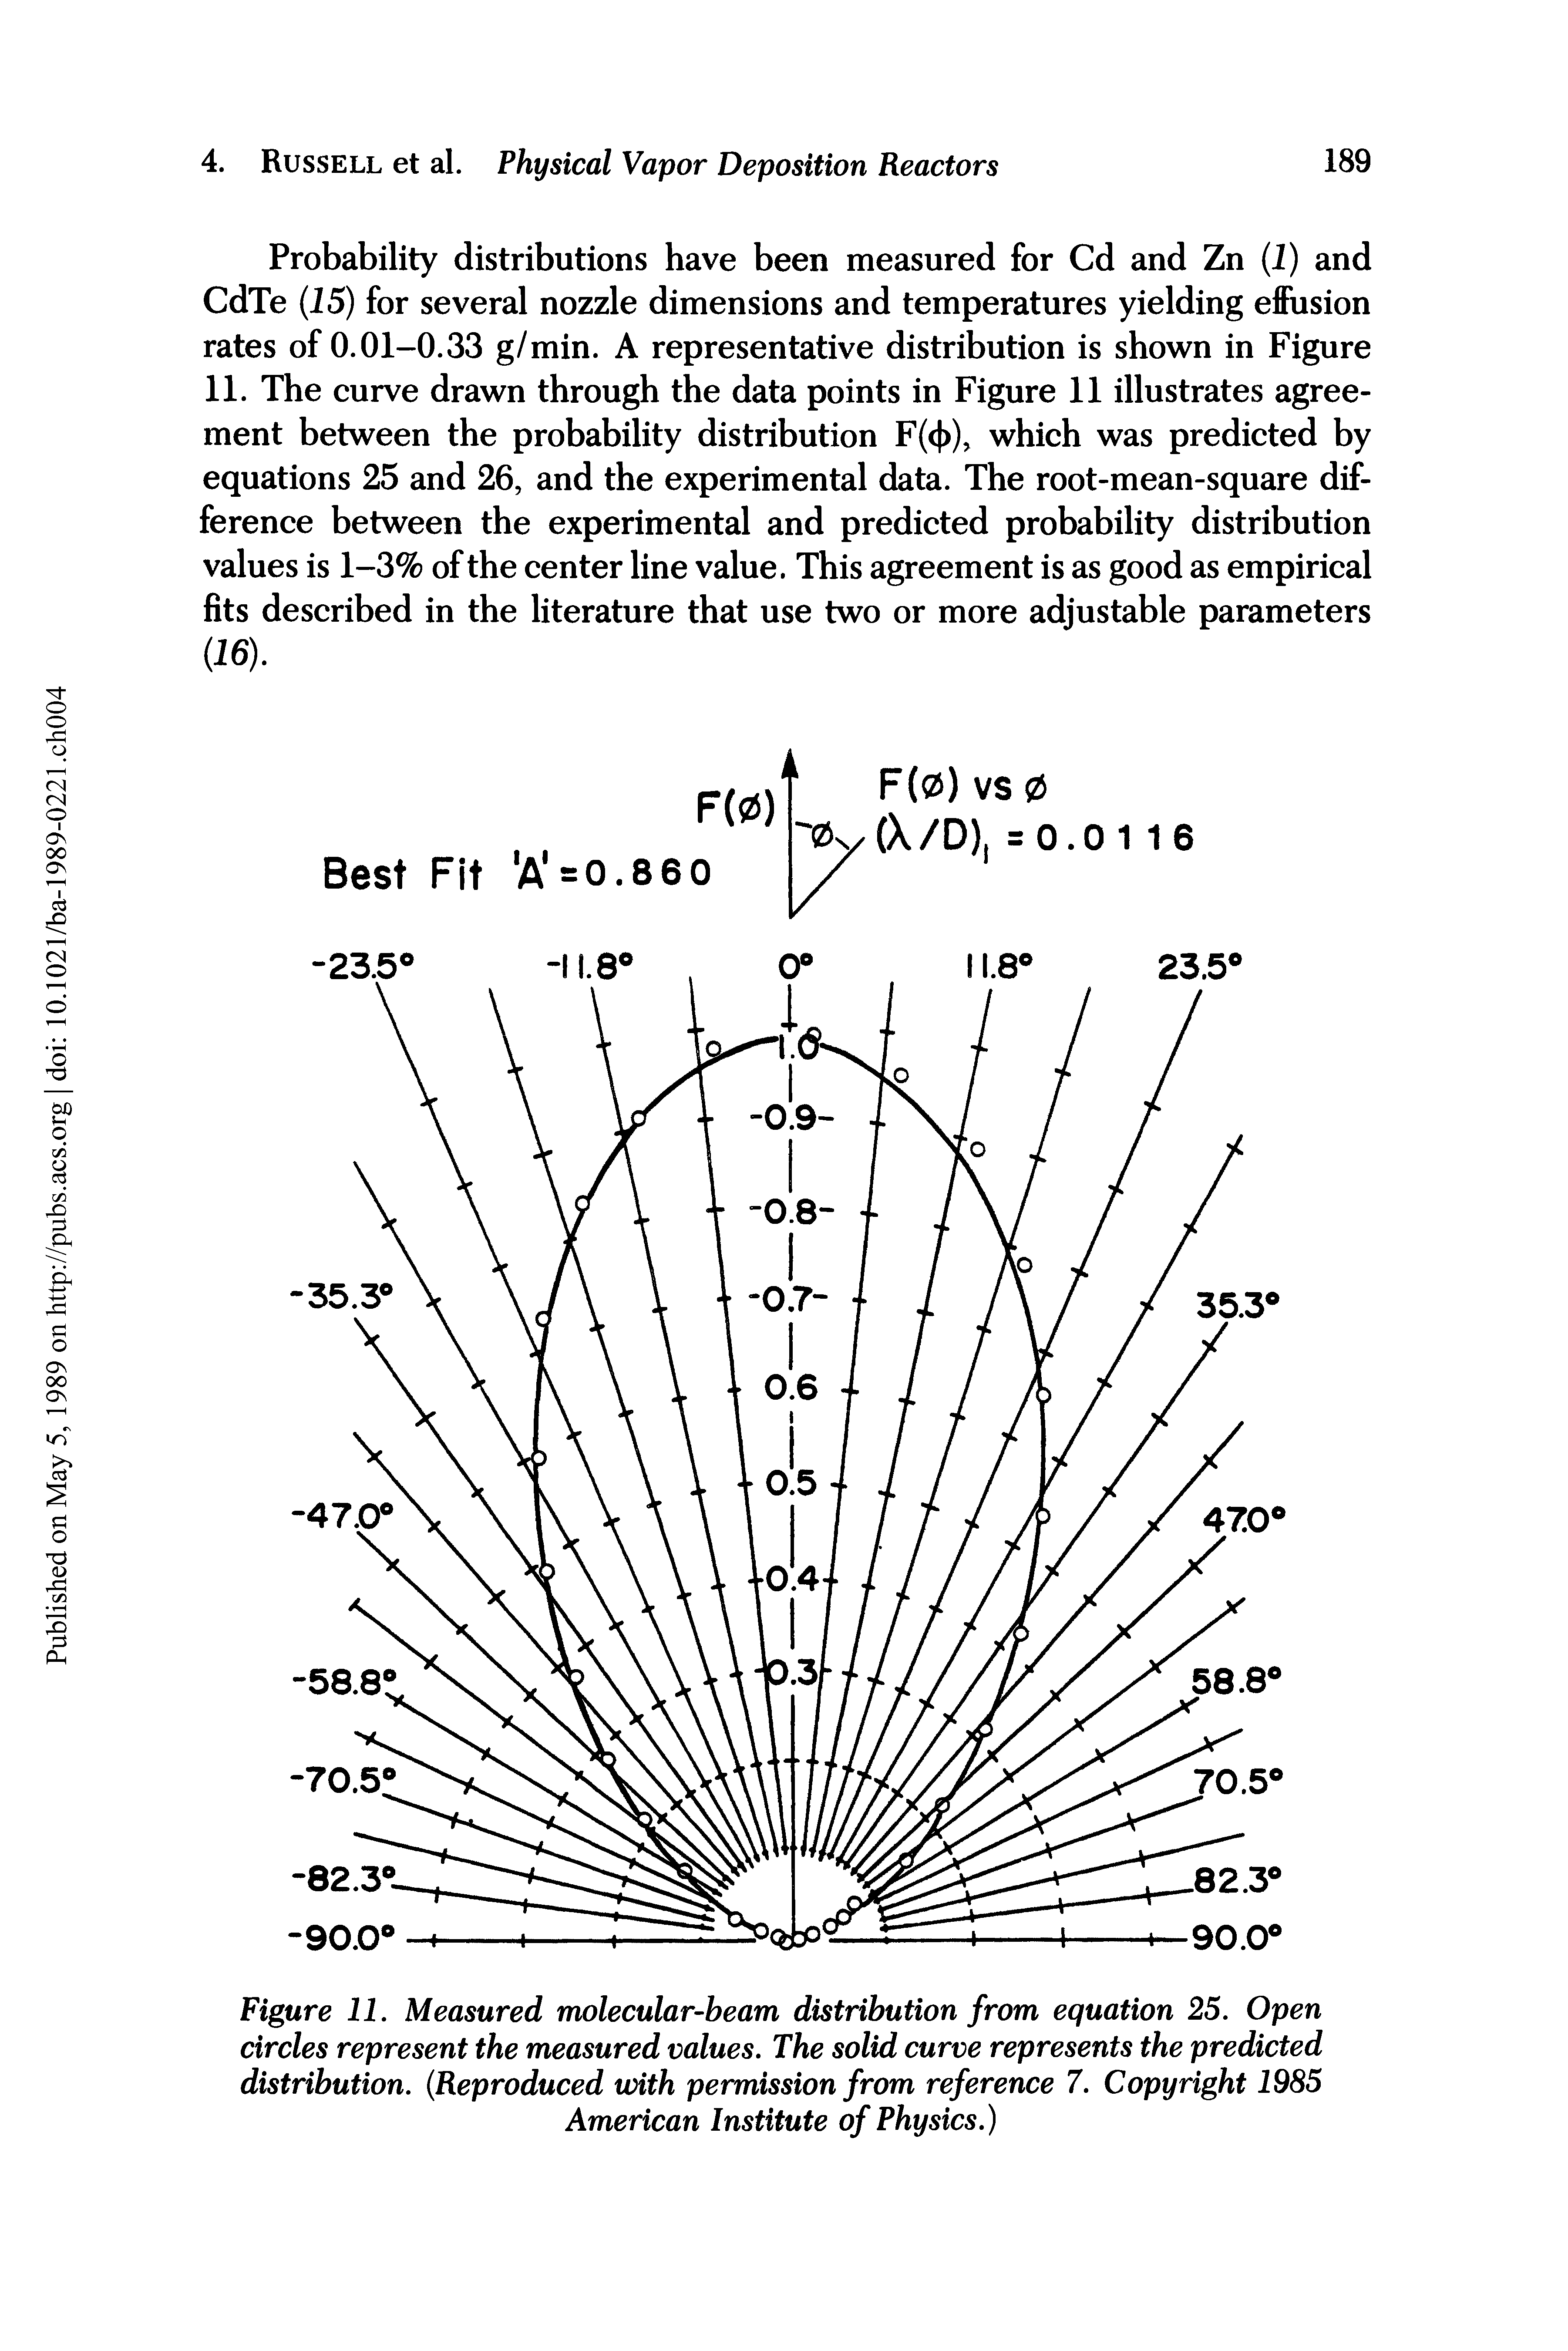 Figure 11. Measured molecular-beam distribution from equation 25. Open circles represent the measured values. The solid curve represents the predicted distribution. (Reproduced with permission from reference 1. Copyright 1985 American Institute of Physics.)...